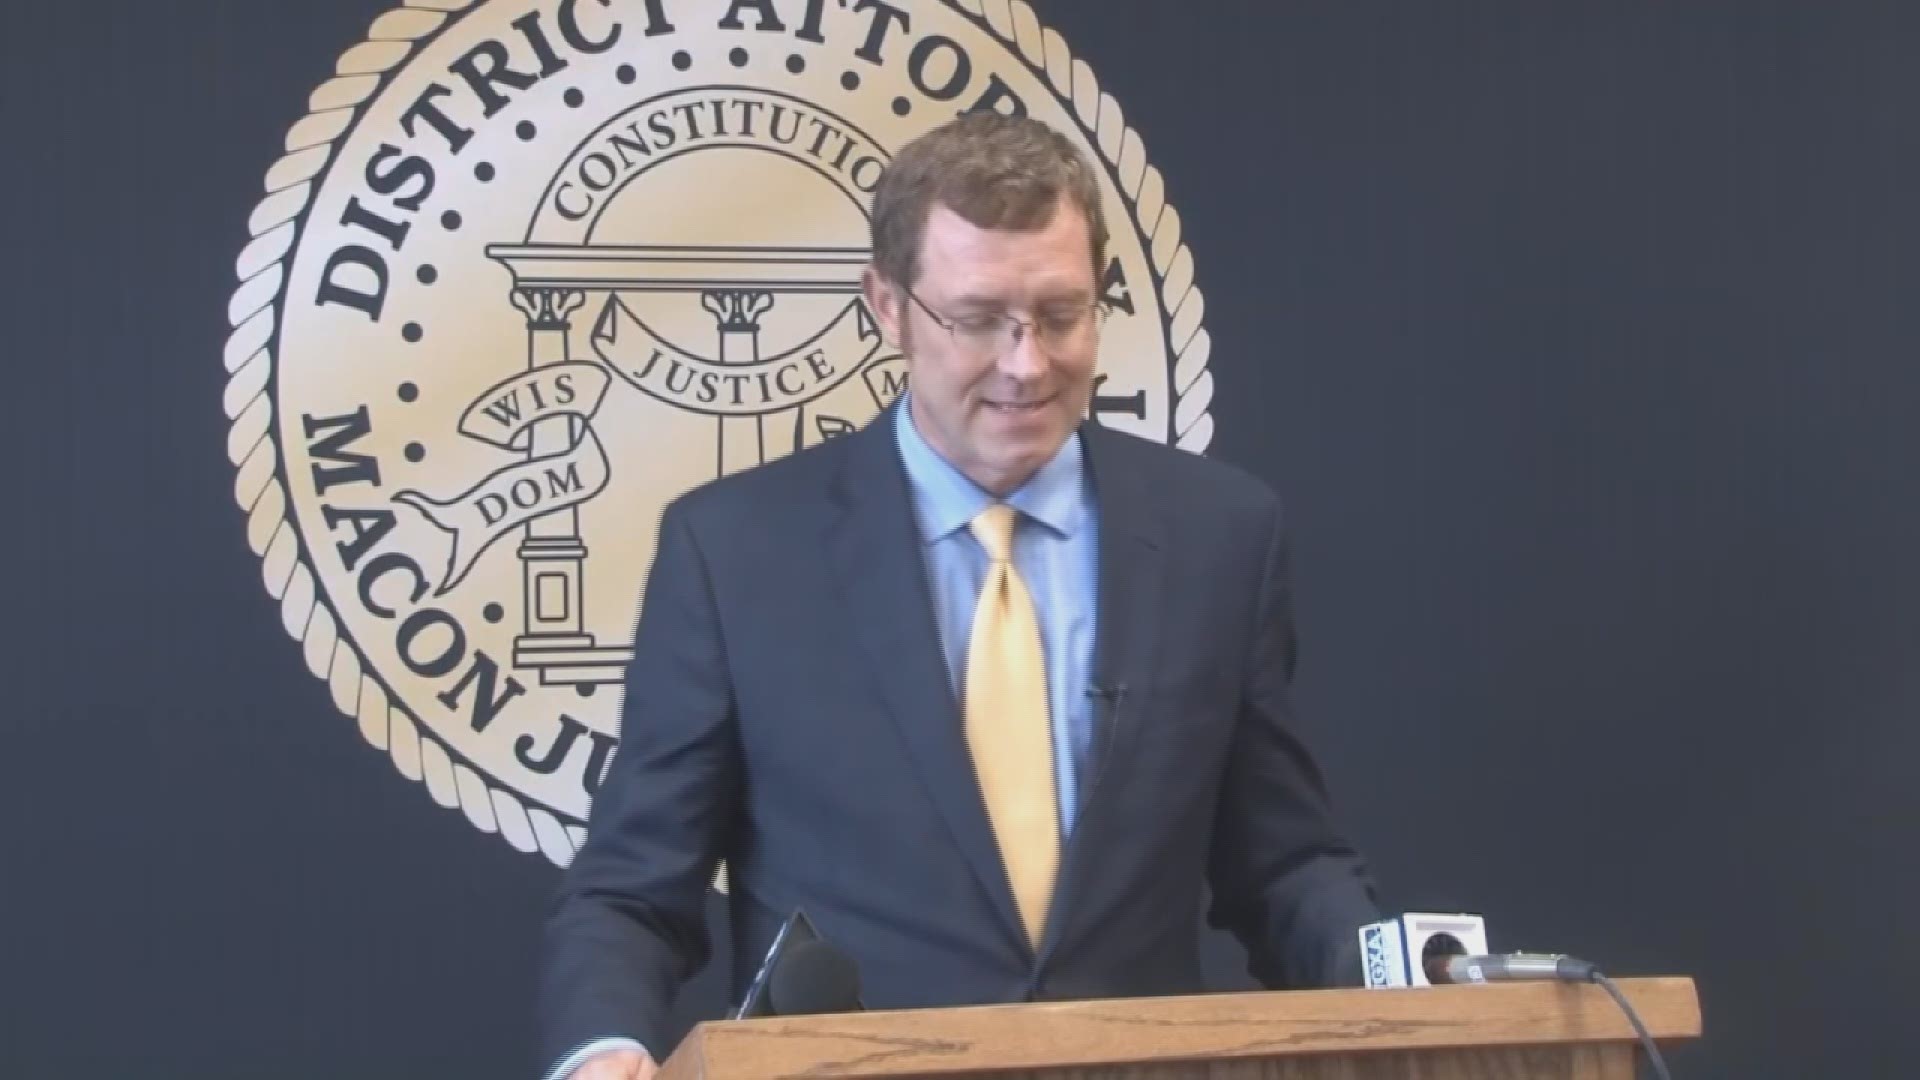 Macon Judicial Circuit District Attorney David Cooke says the partnership has been successful after the first year